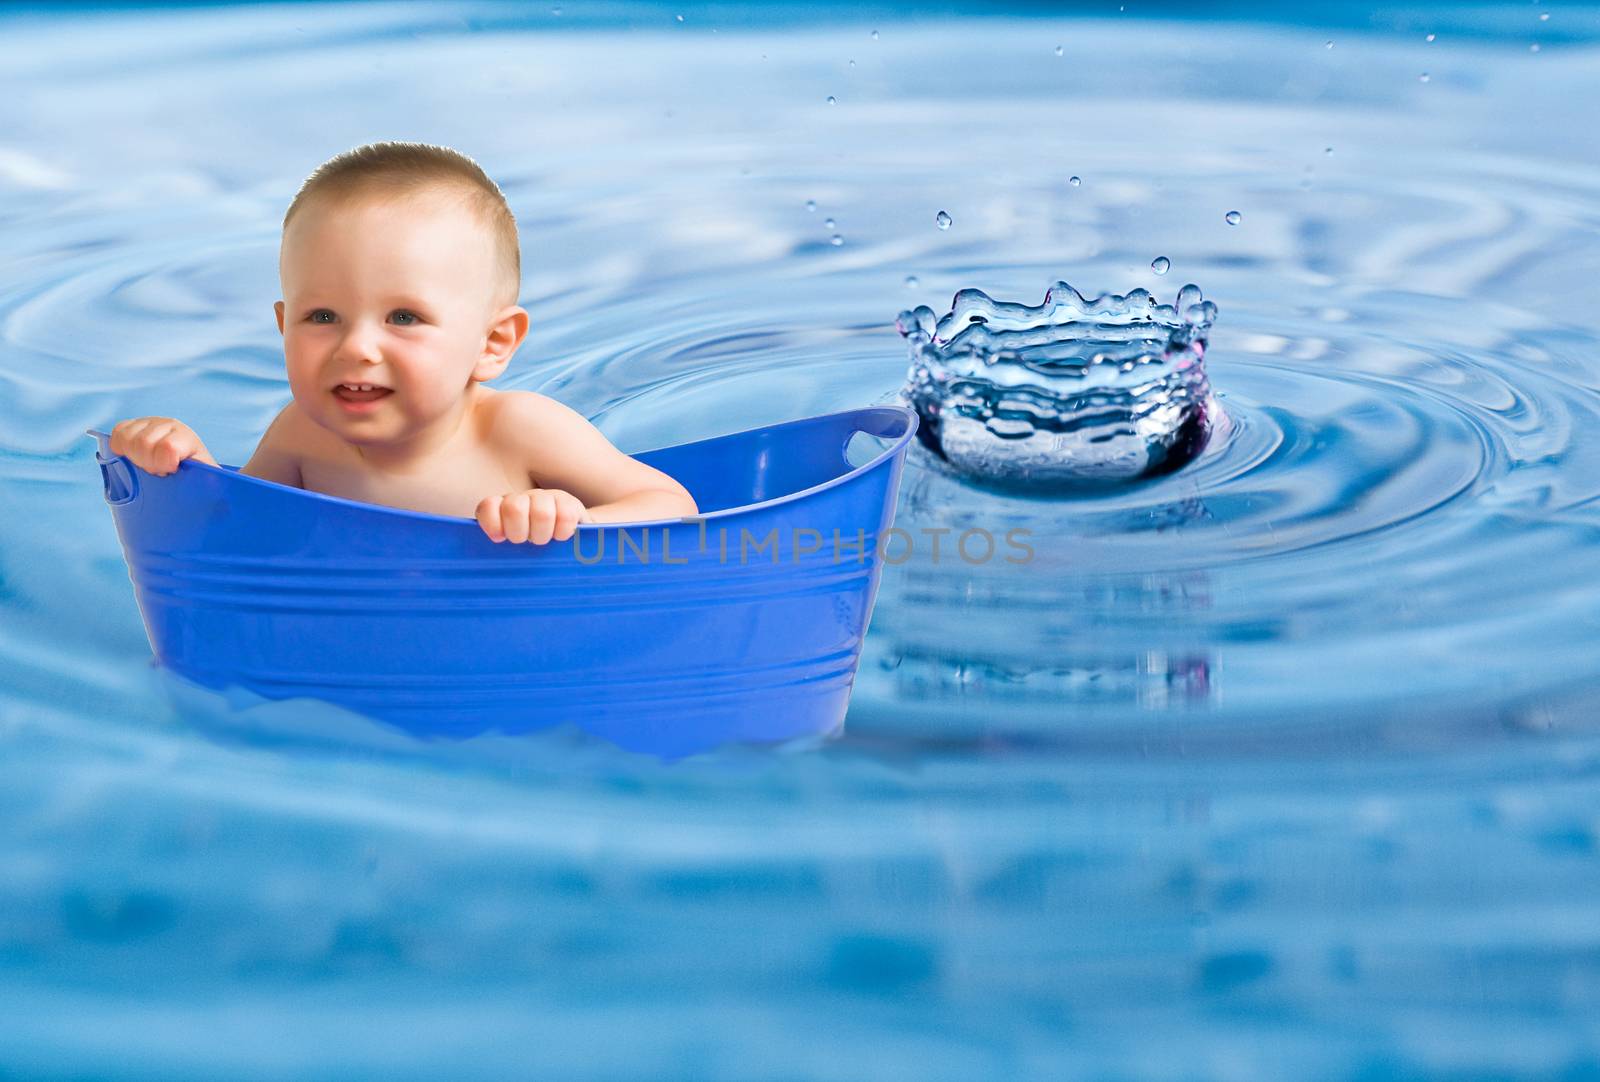 Baby in a plastic tub placed in water-drop photo